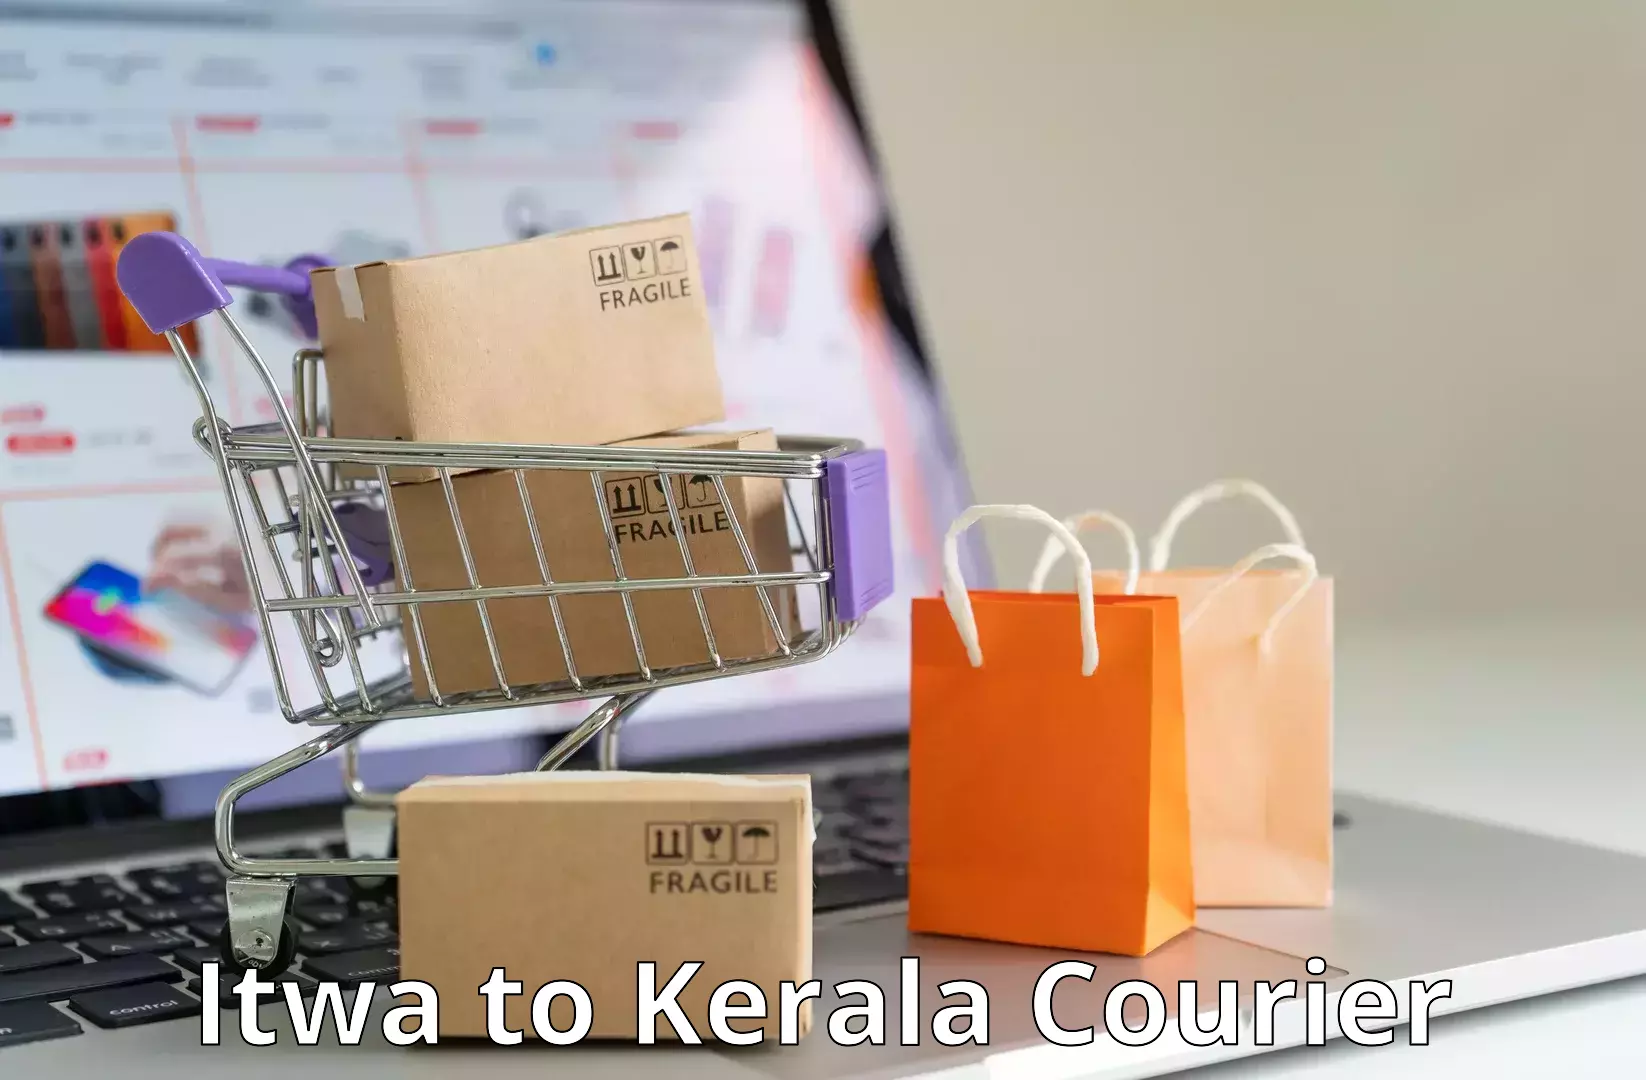 Flexible delivery scheduling Itwa to Kerala